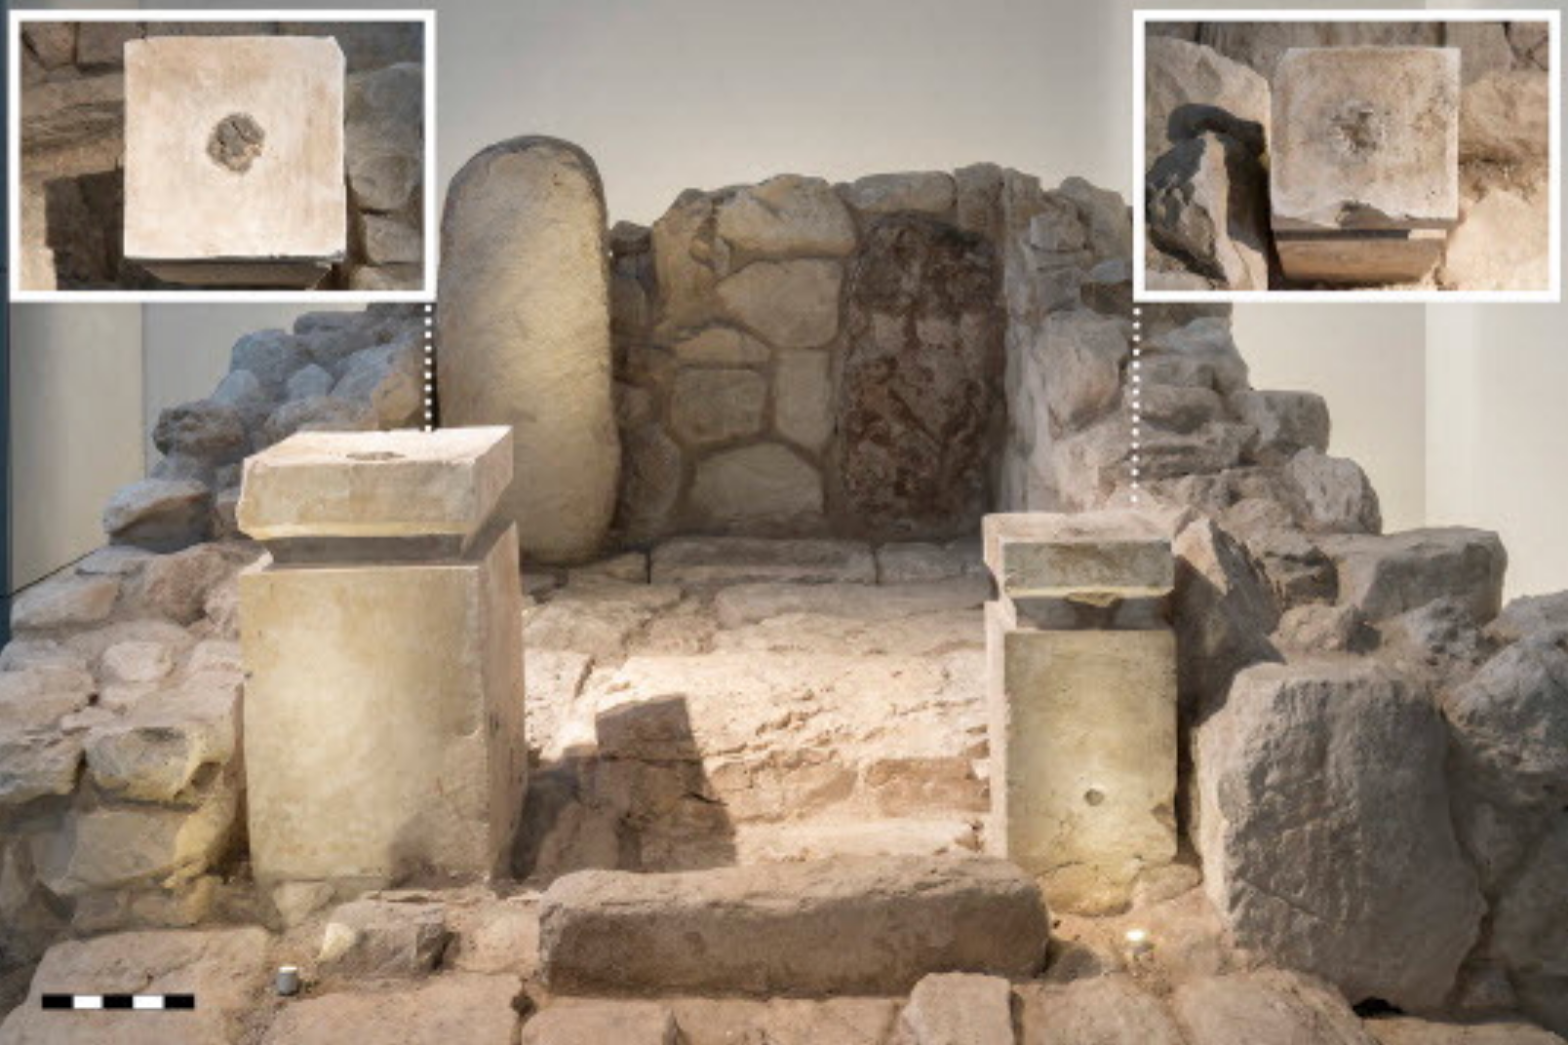 Two limestone altars found at Tel Arad in Israel, with insets showing residue piles containing traces of cannabis (right) and frankincense (left).  (Image: E. Arie et al., 2020)